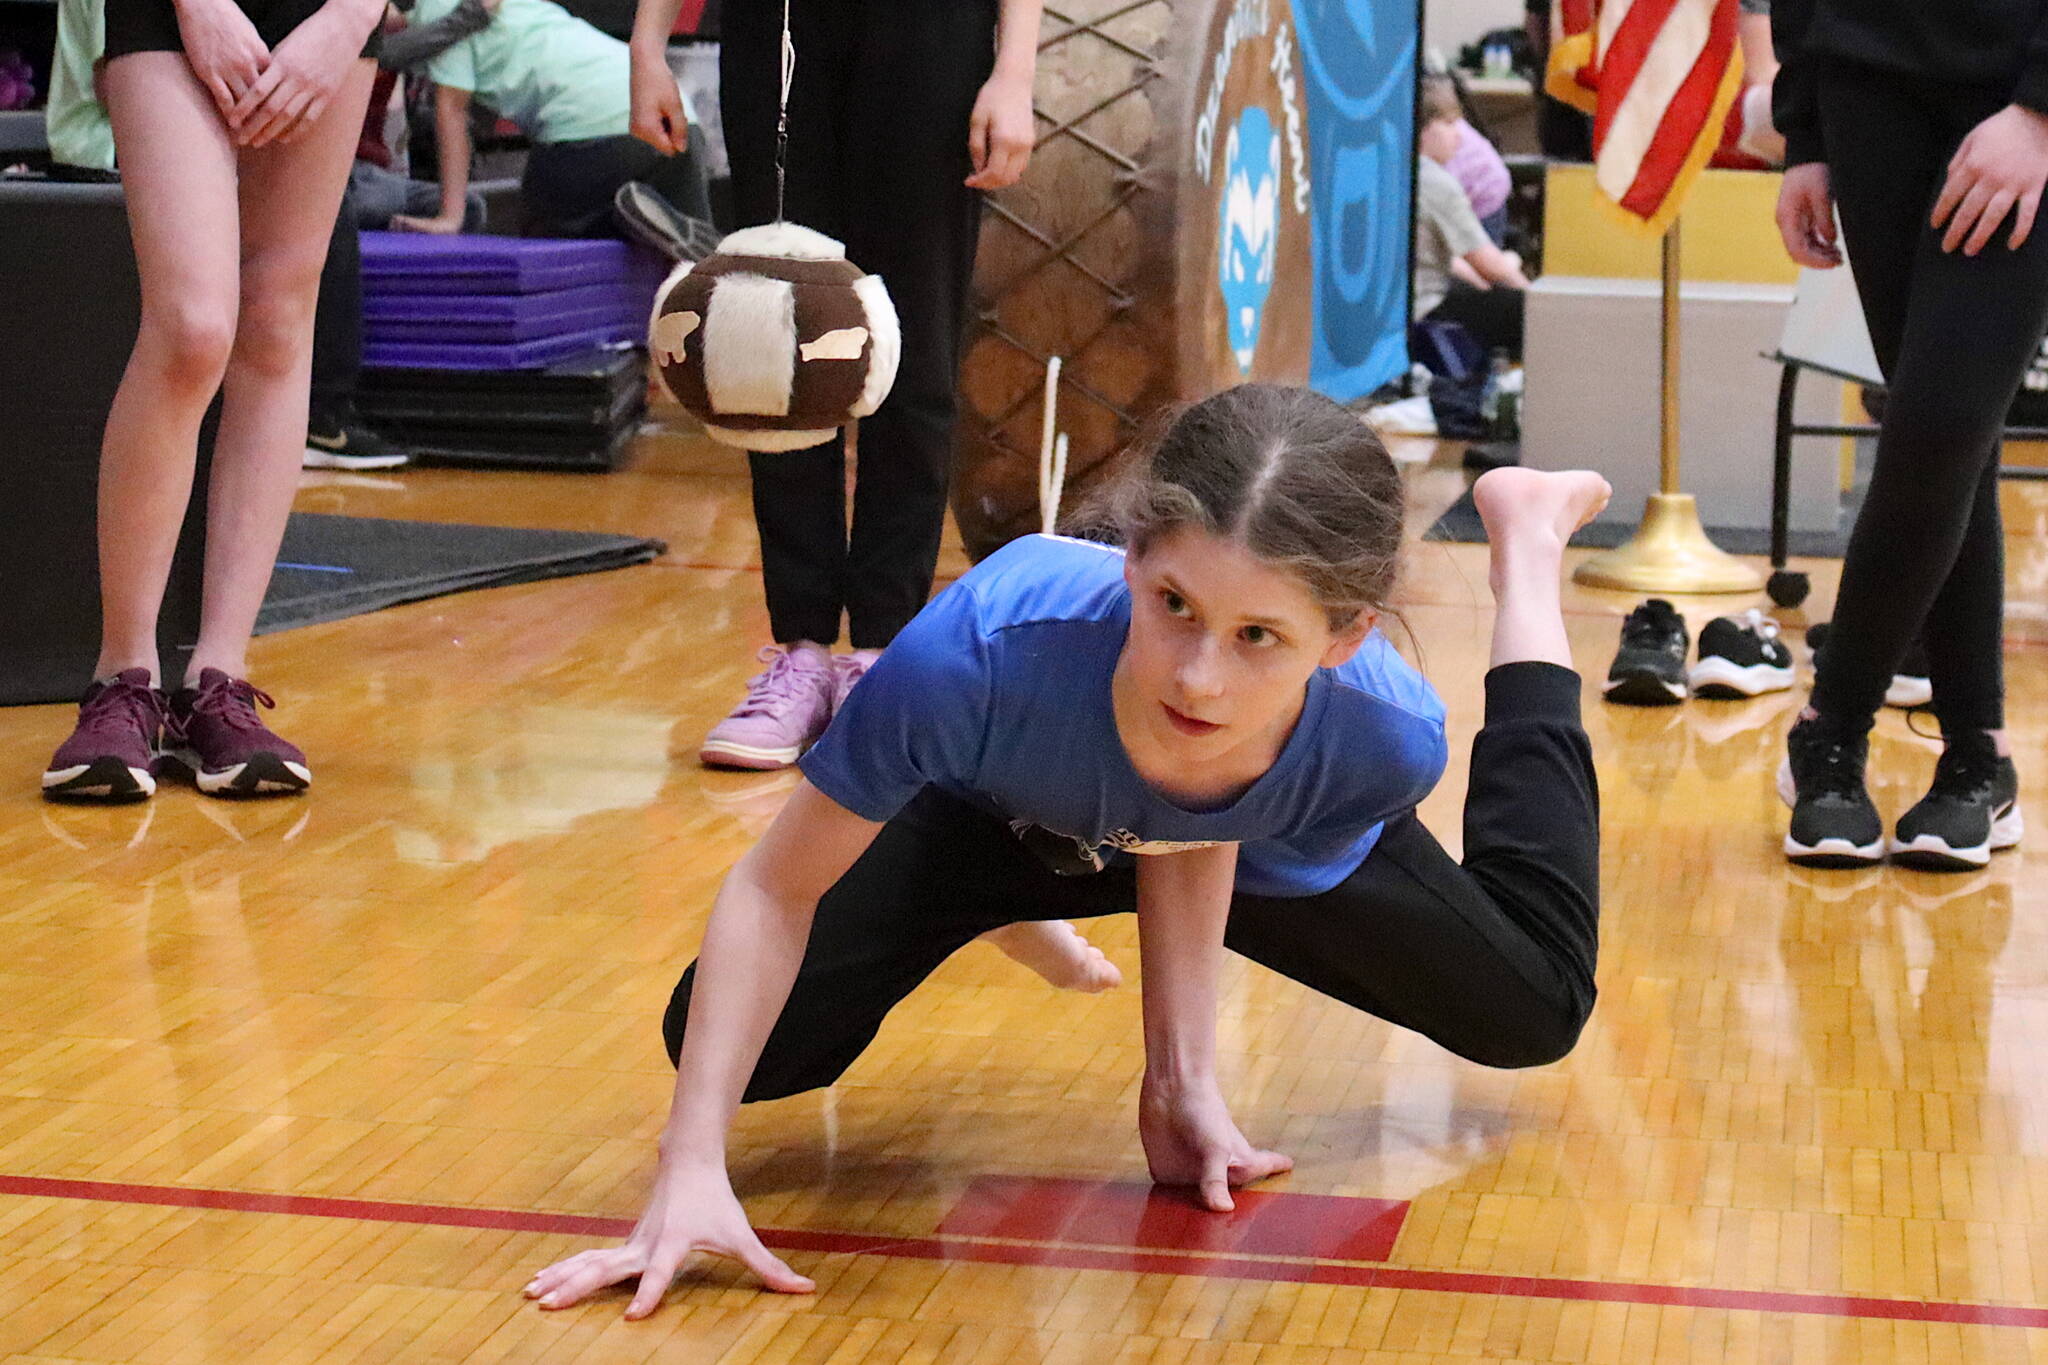 Maddy Fortunato, a Chickaloon middle school student, sets to attempt the one-hand reach by touching a suspended ball while remaining balanced on the other hand during the Traditional Games on Sunday at Juneau-Douglas High School: Yadaa.at Kalé. (Mark Sabbatini / Juneau Empire)